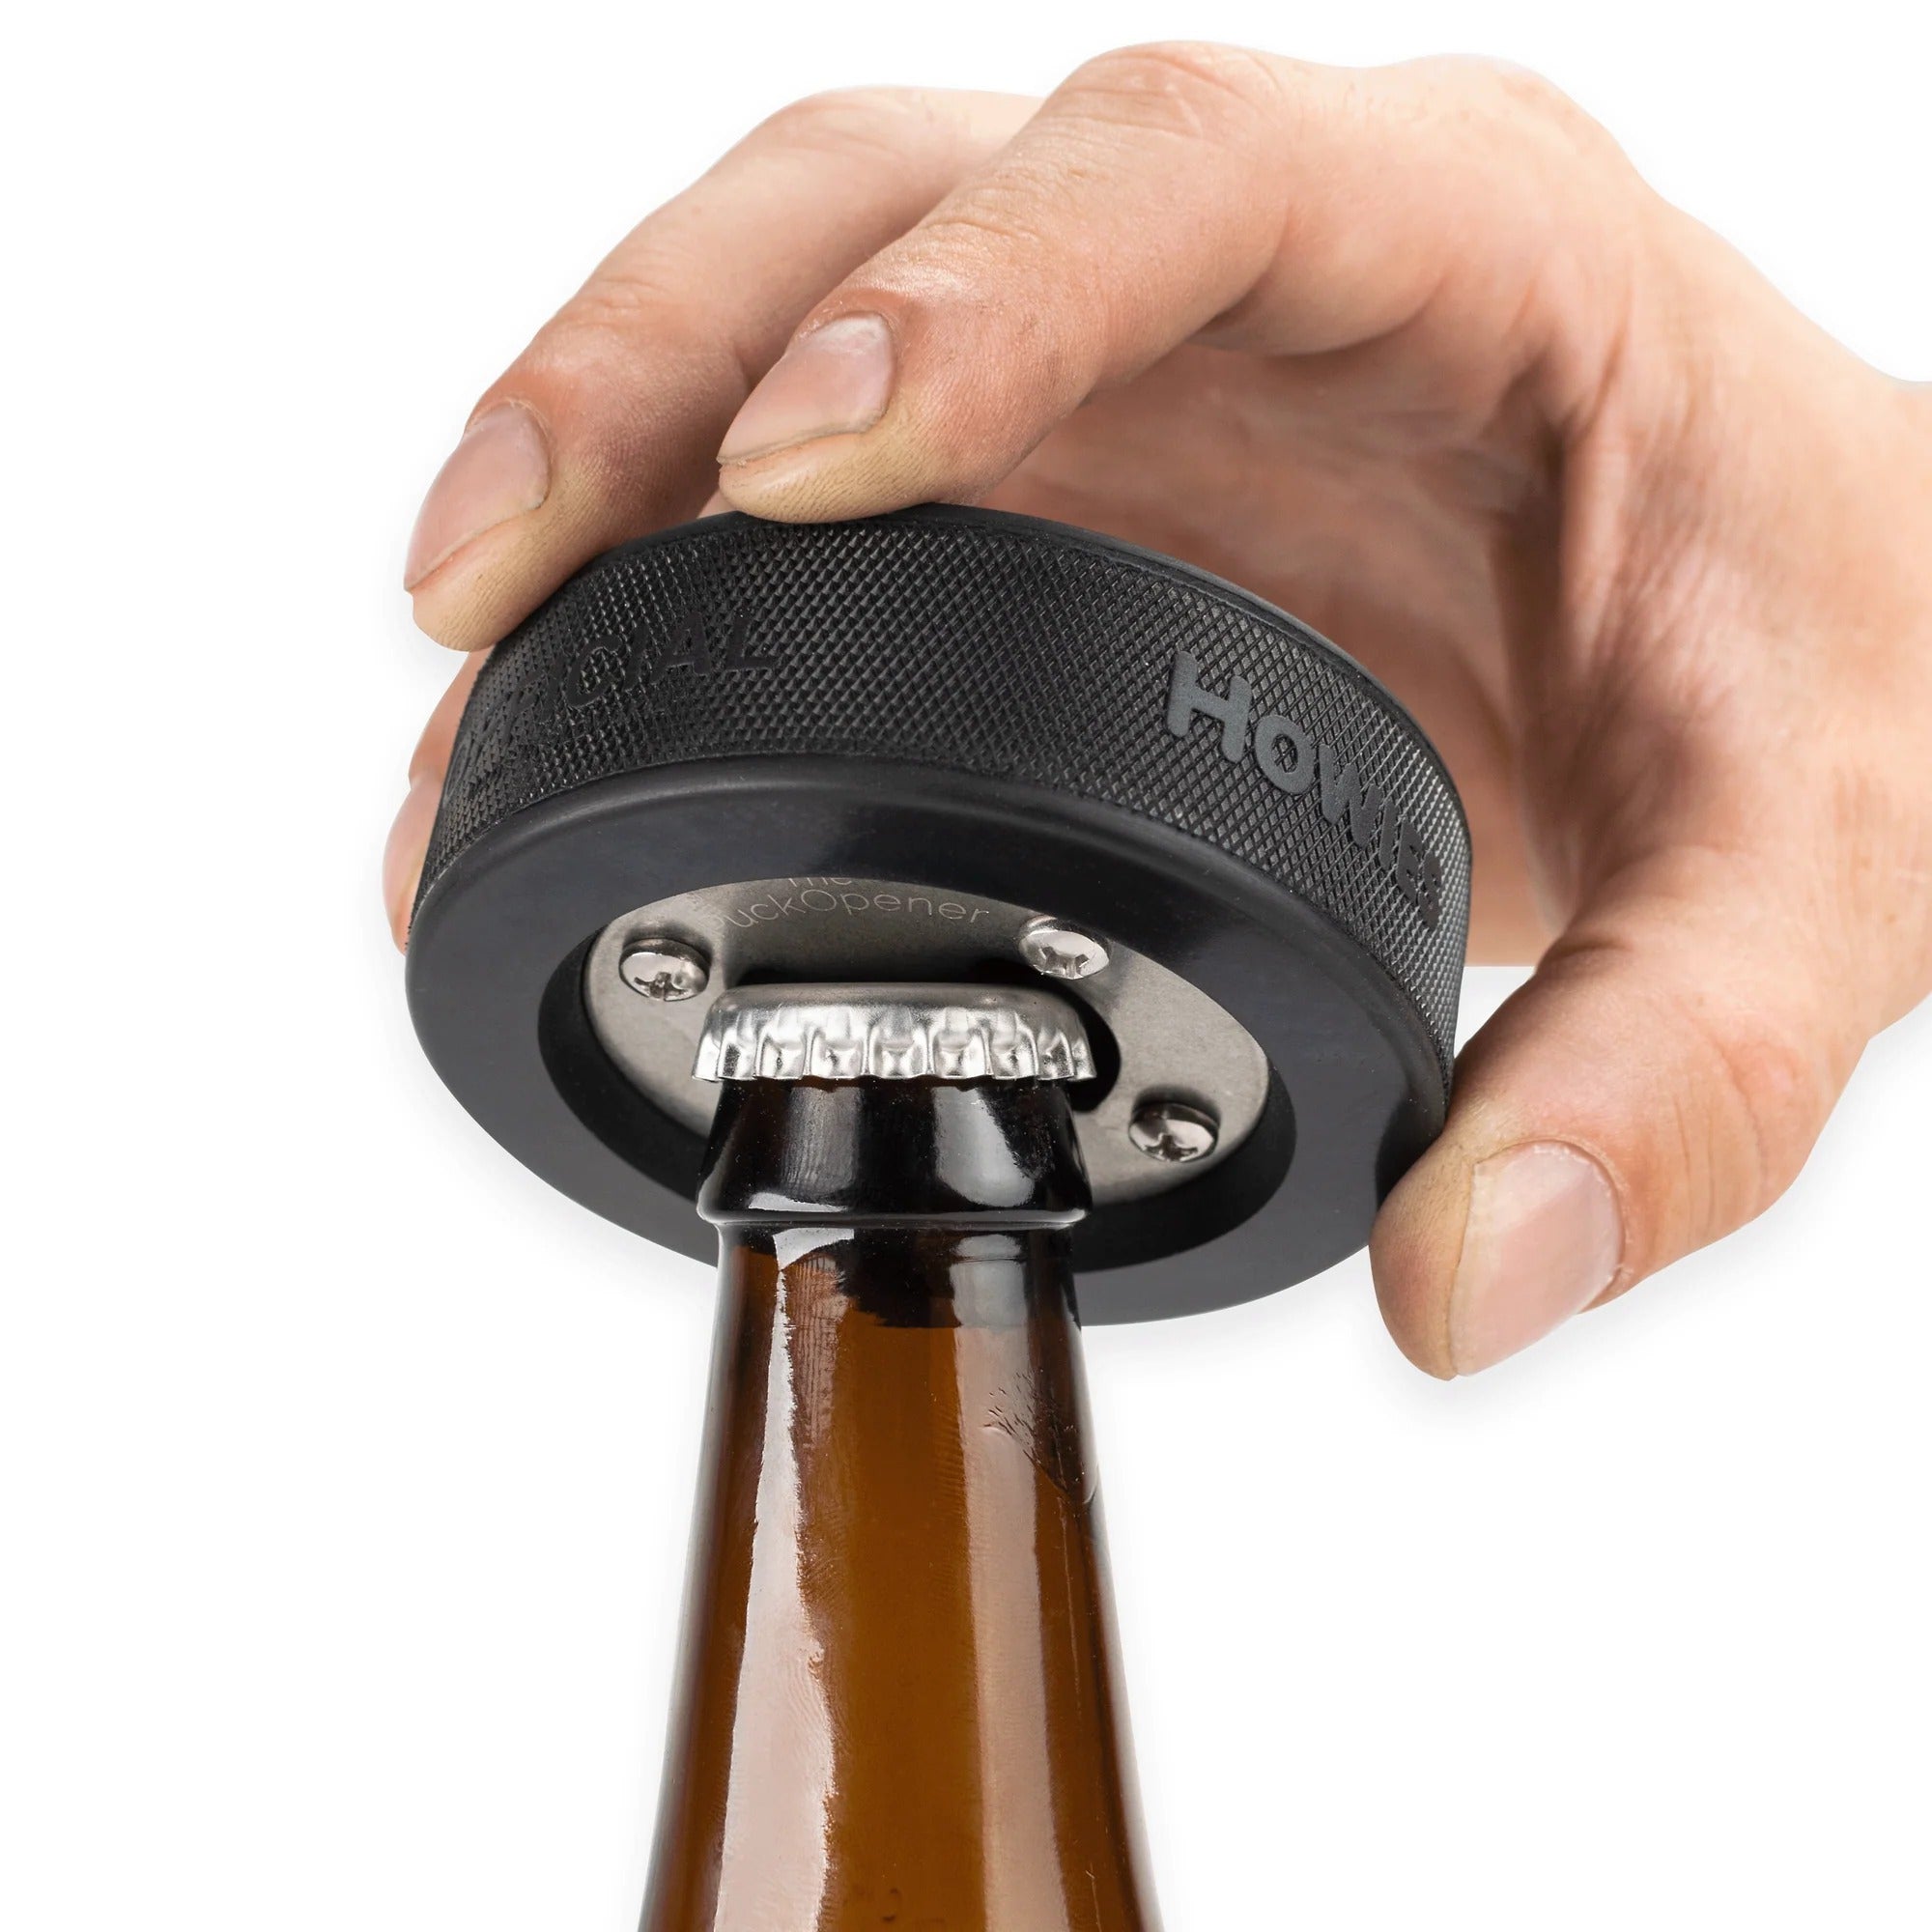 Open your next beverage with a uniquely designed hockey puck bottle opener